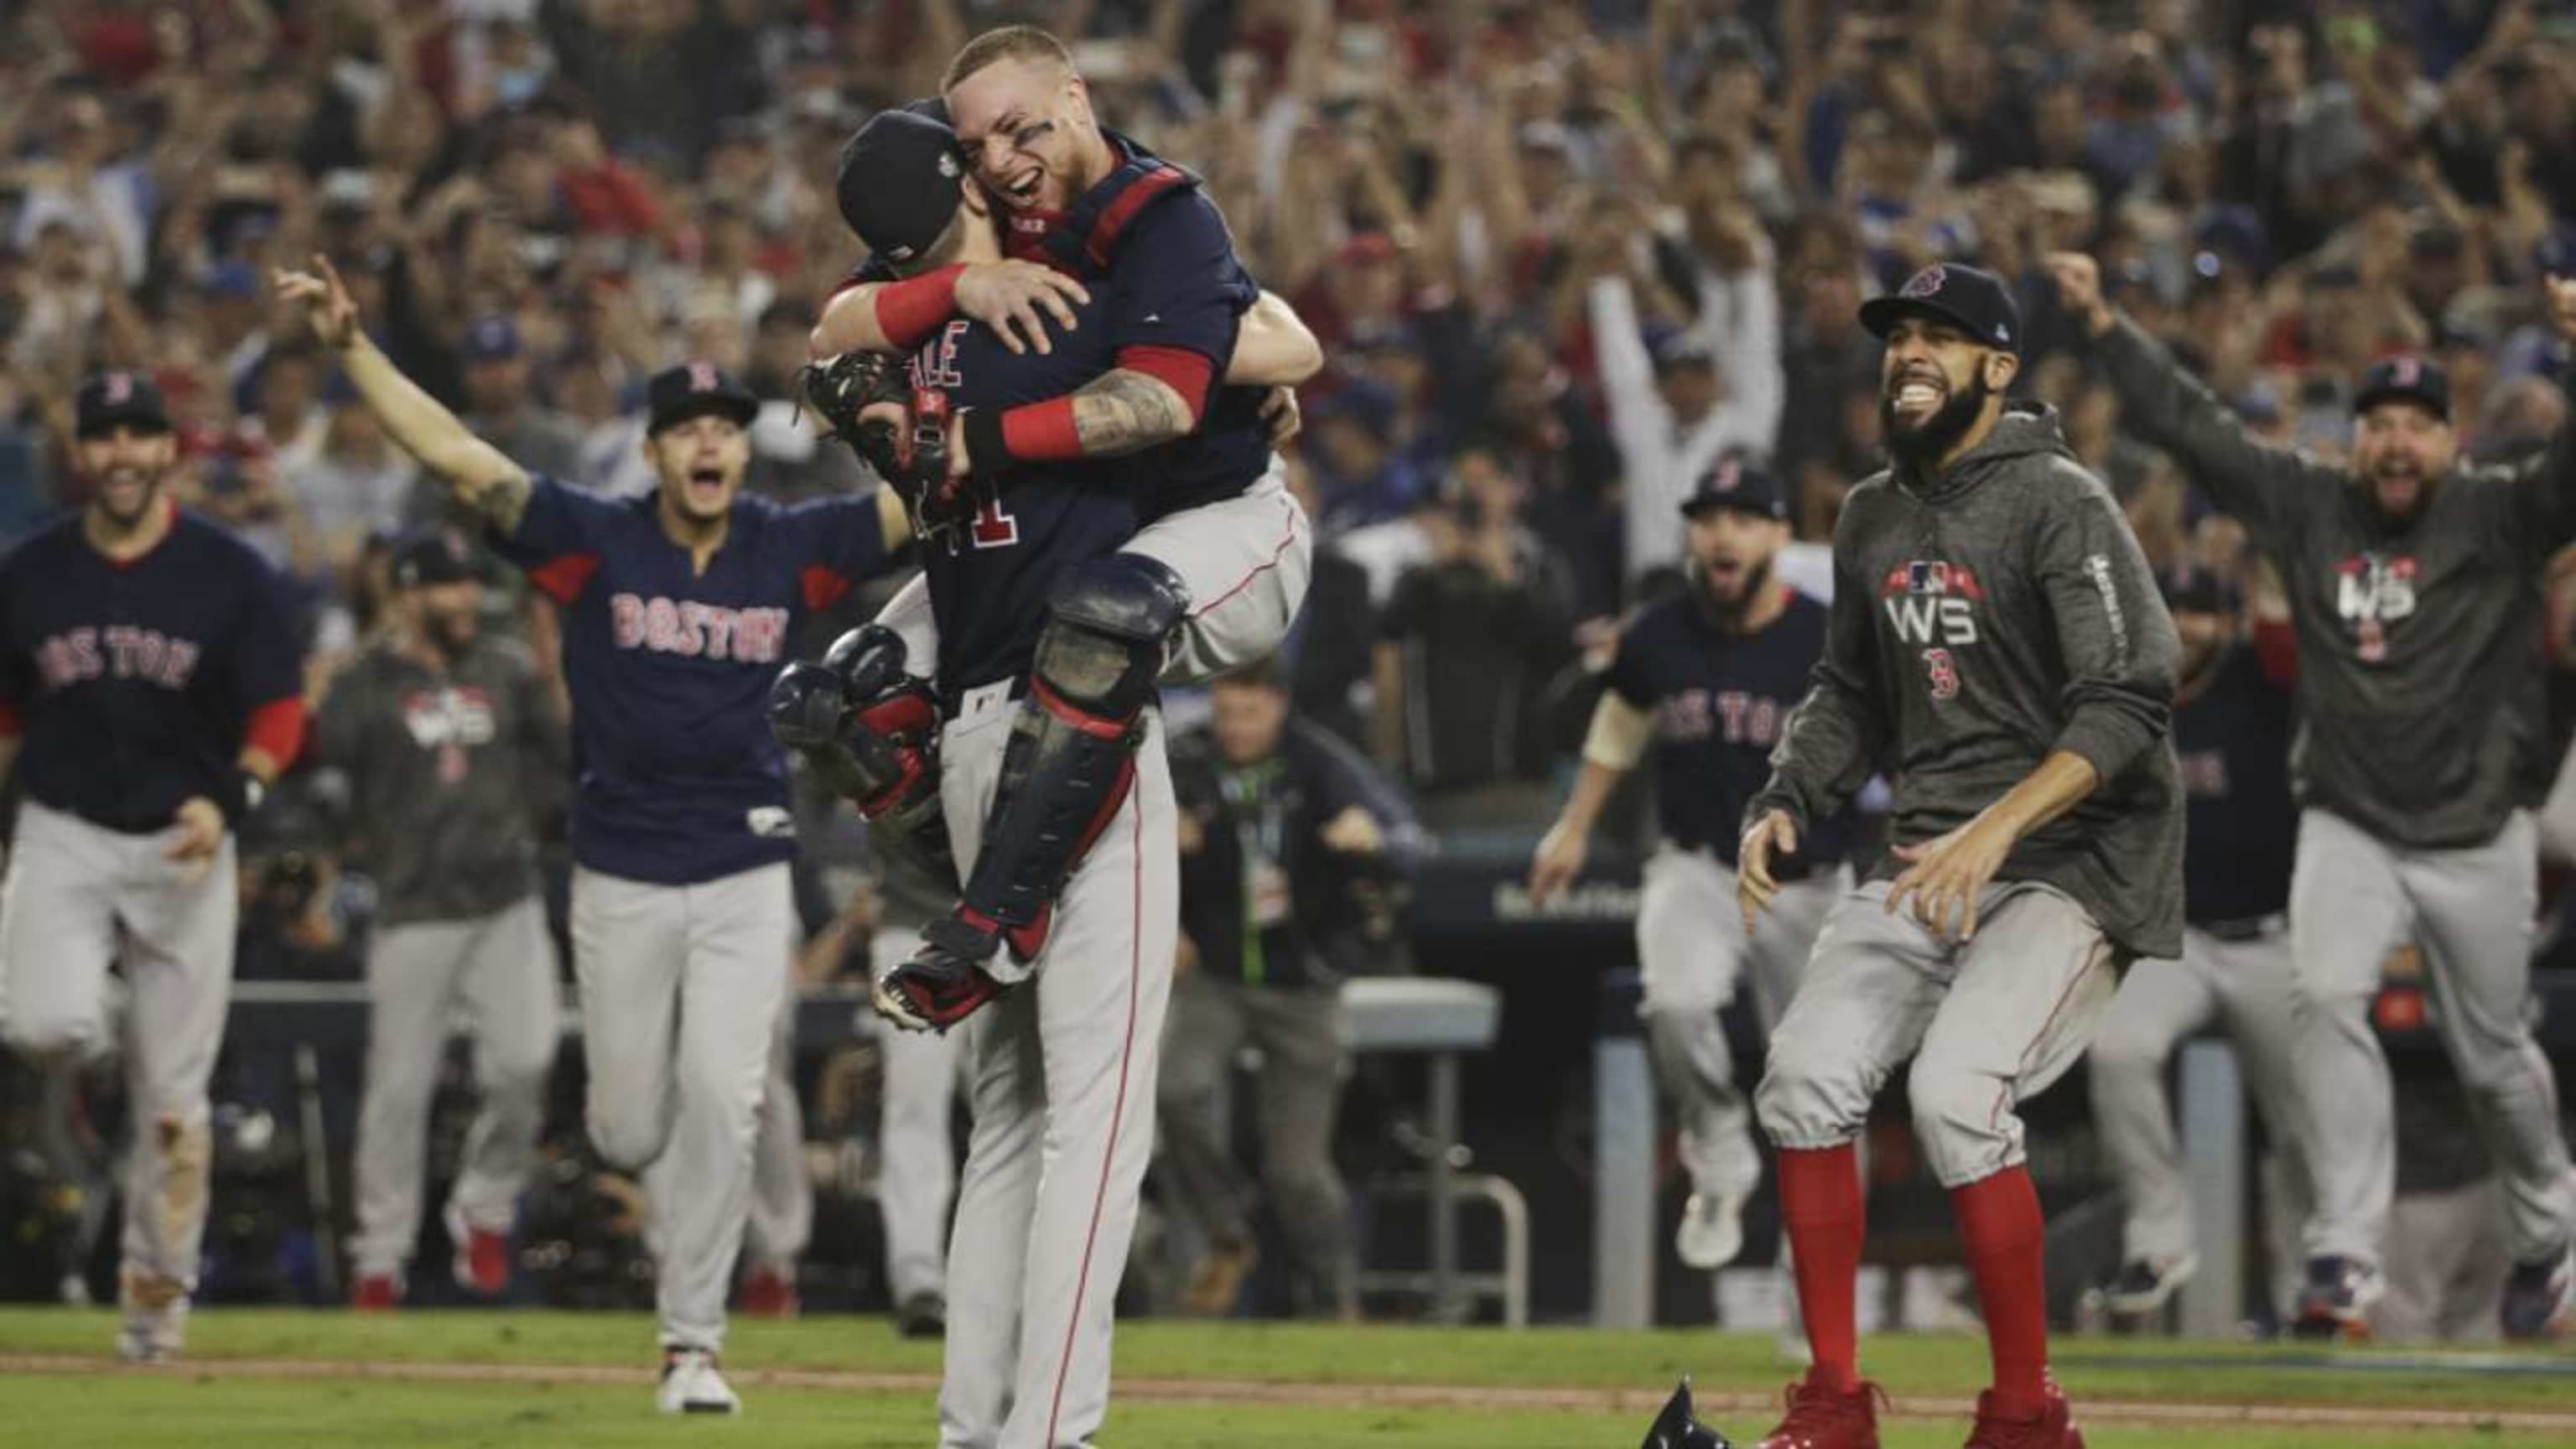 Red Sox win 2018 World Series title